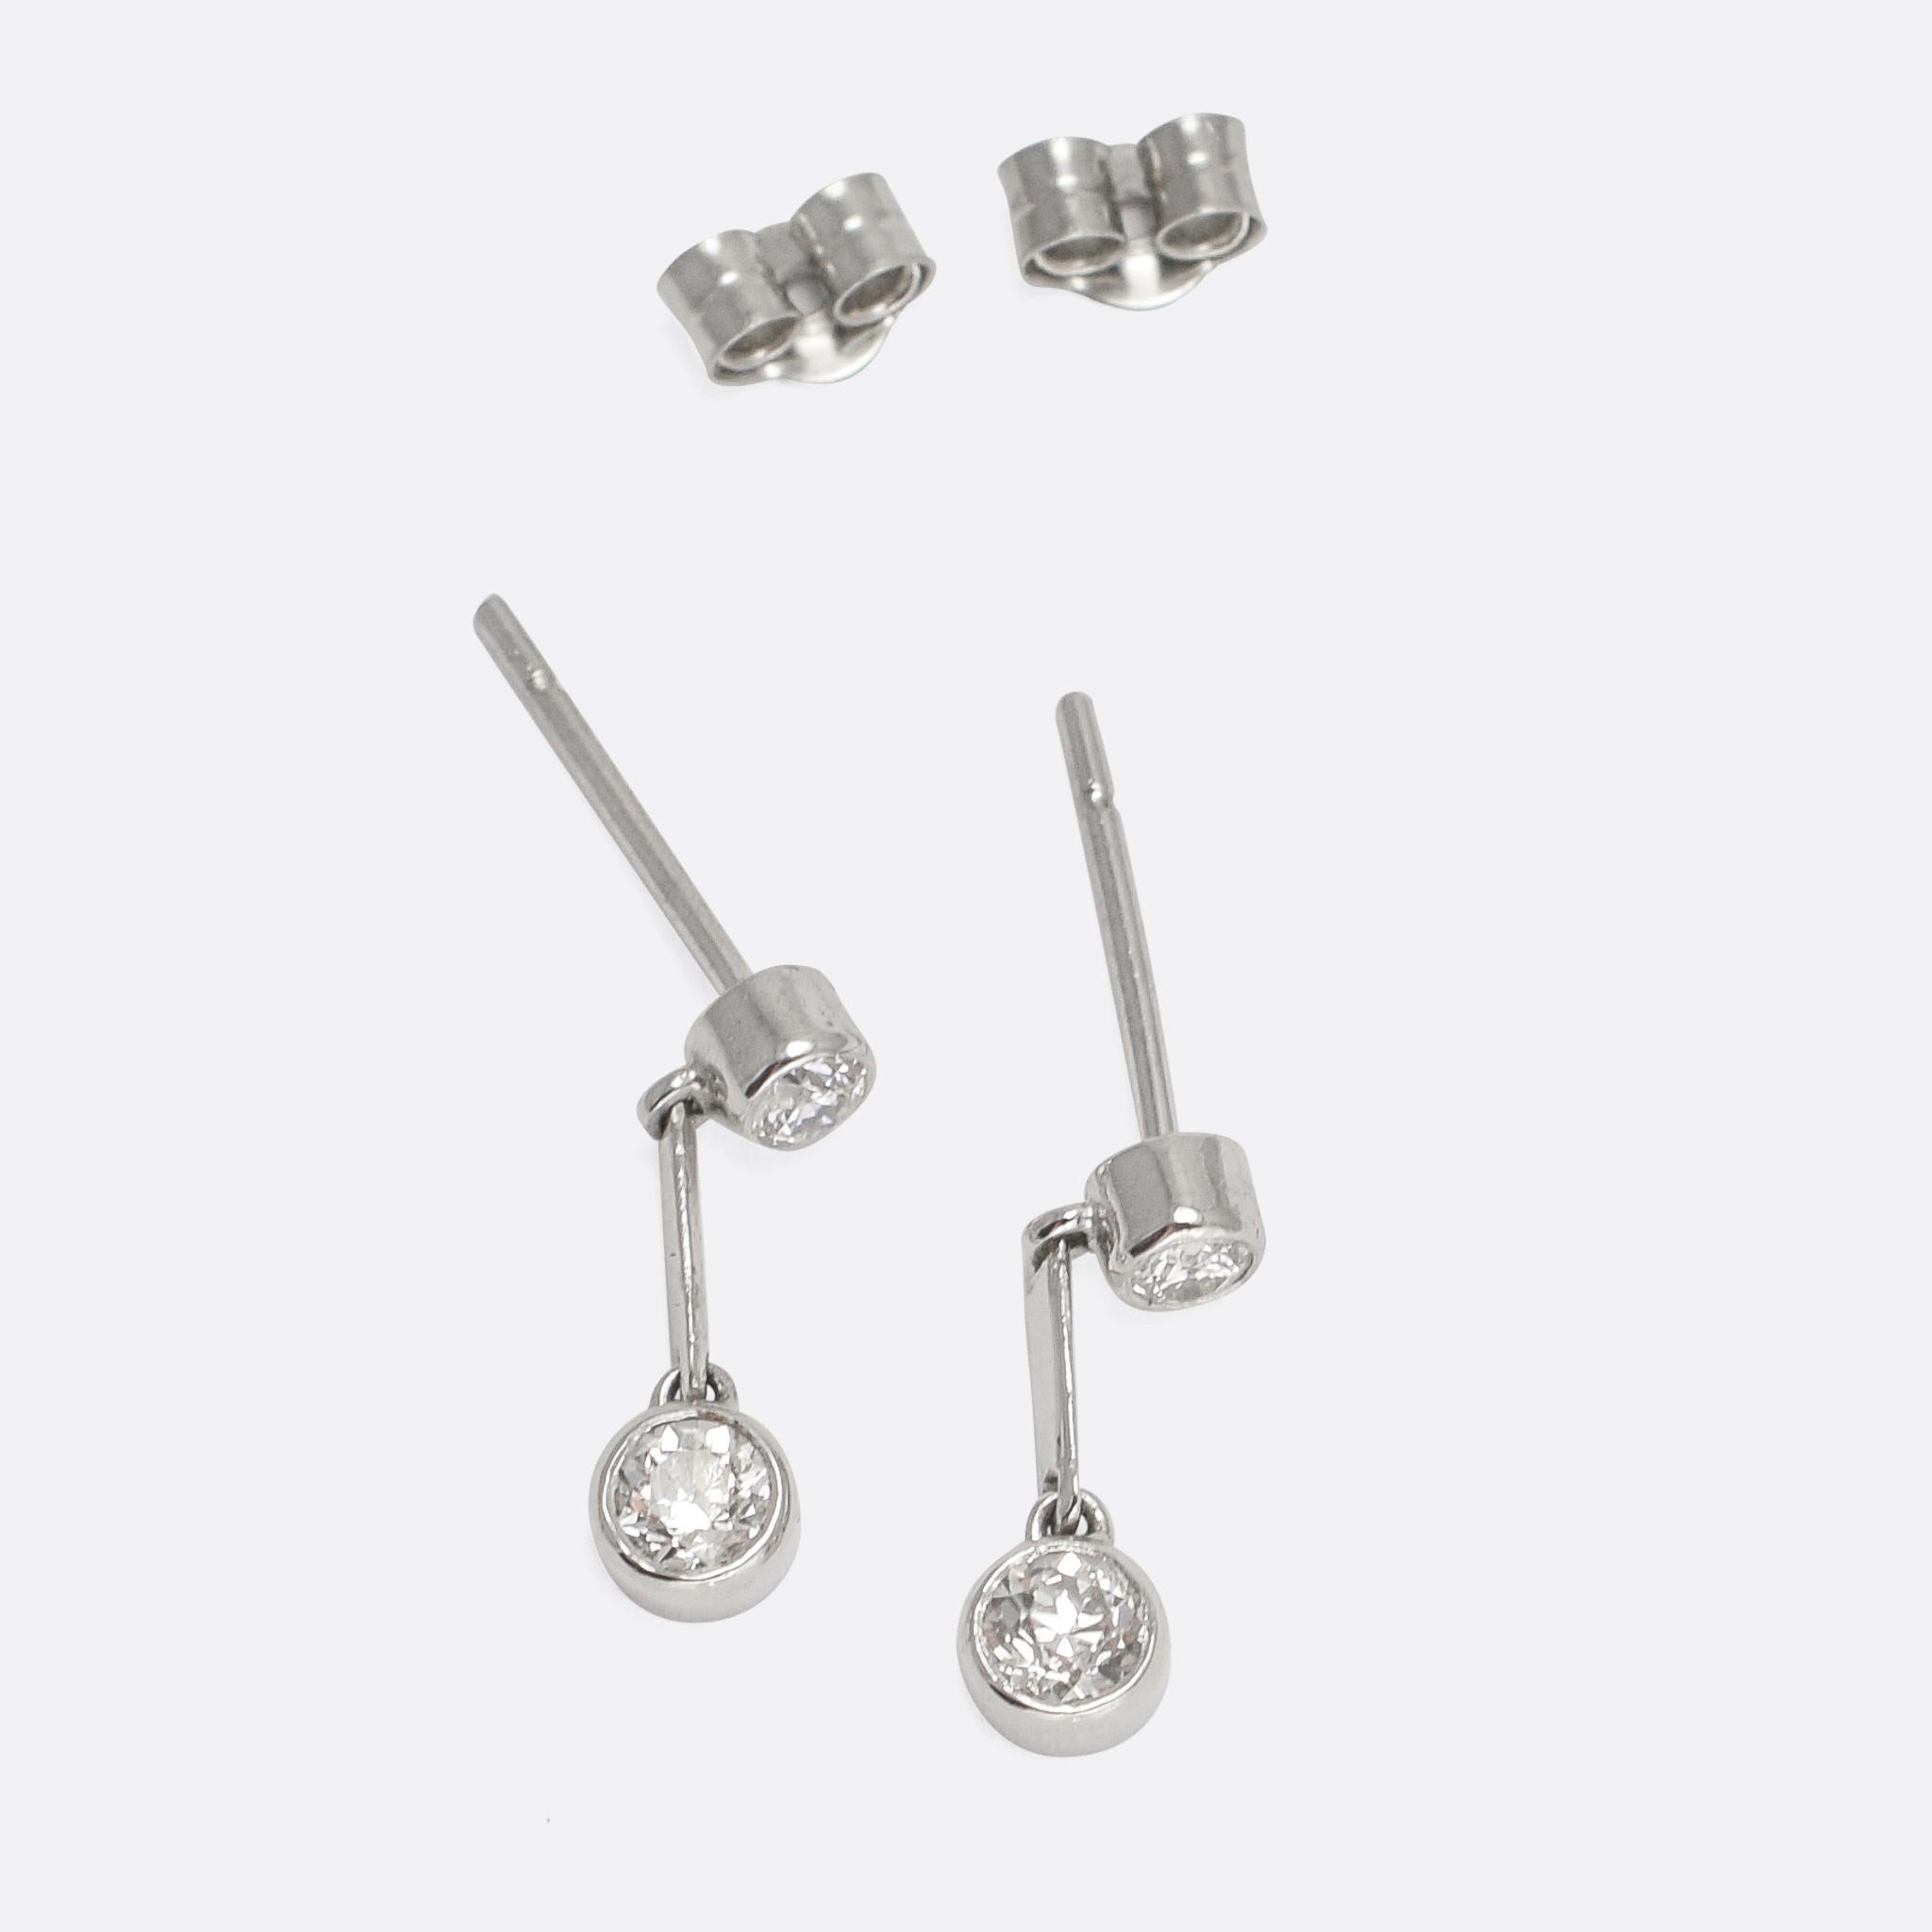 A pretty pair of diamond stud earrings; each one set with two old cut stones separated by an articulated platinum bar. They epitomise Edwardian styling: refined and subtle, but with an undeniable and eye-catching beauty. Rare and perfectly